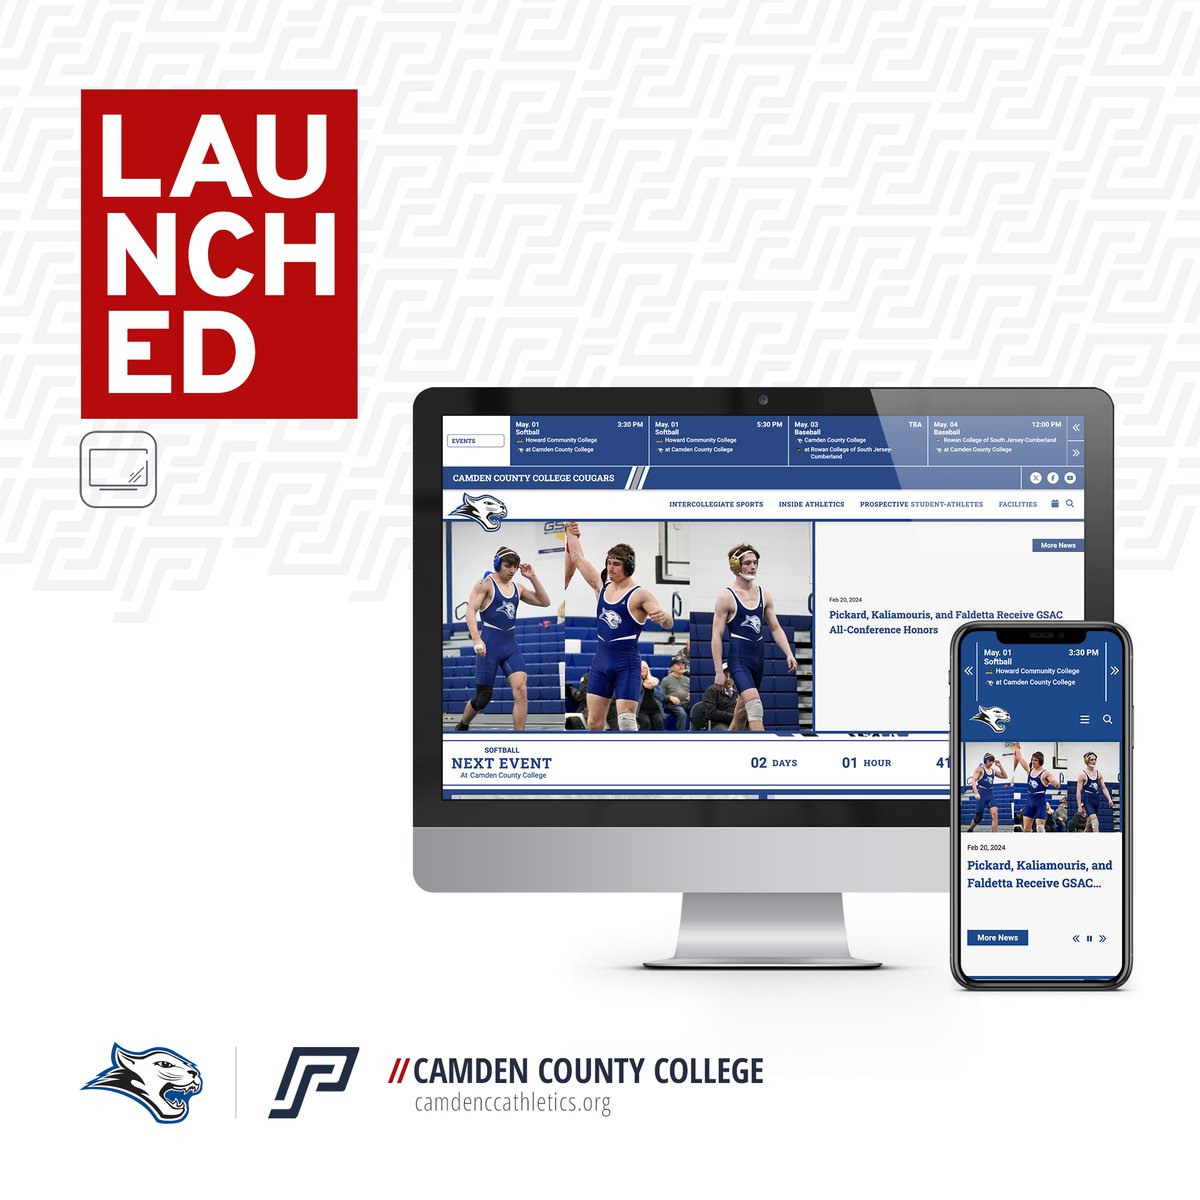 🚀 Launched! Check out the new site for @CamdenccCougars at camdenccathletics.org.